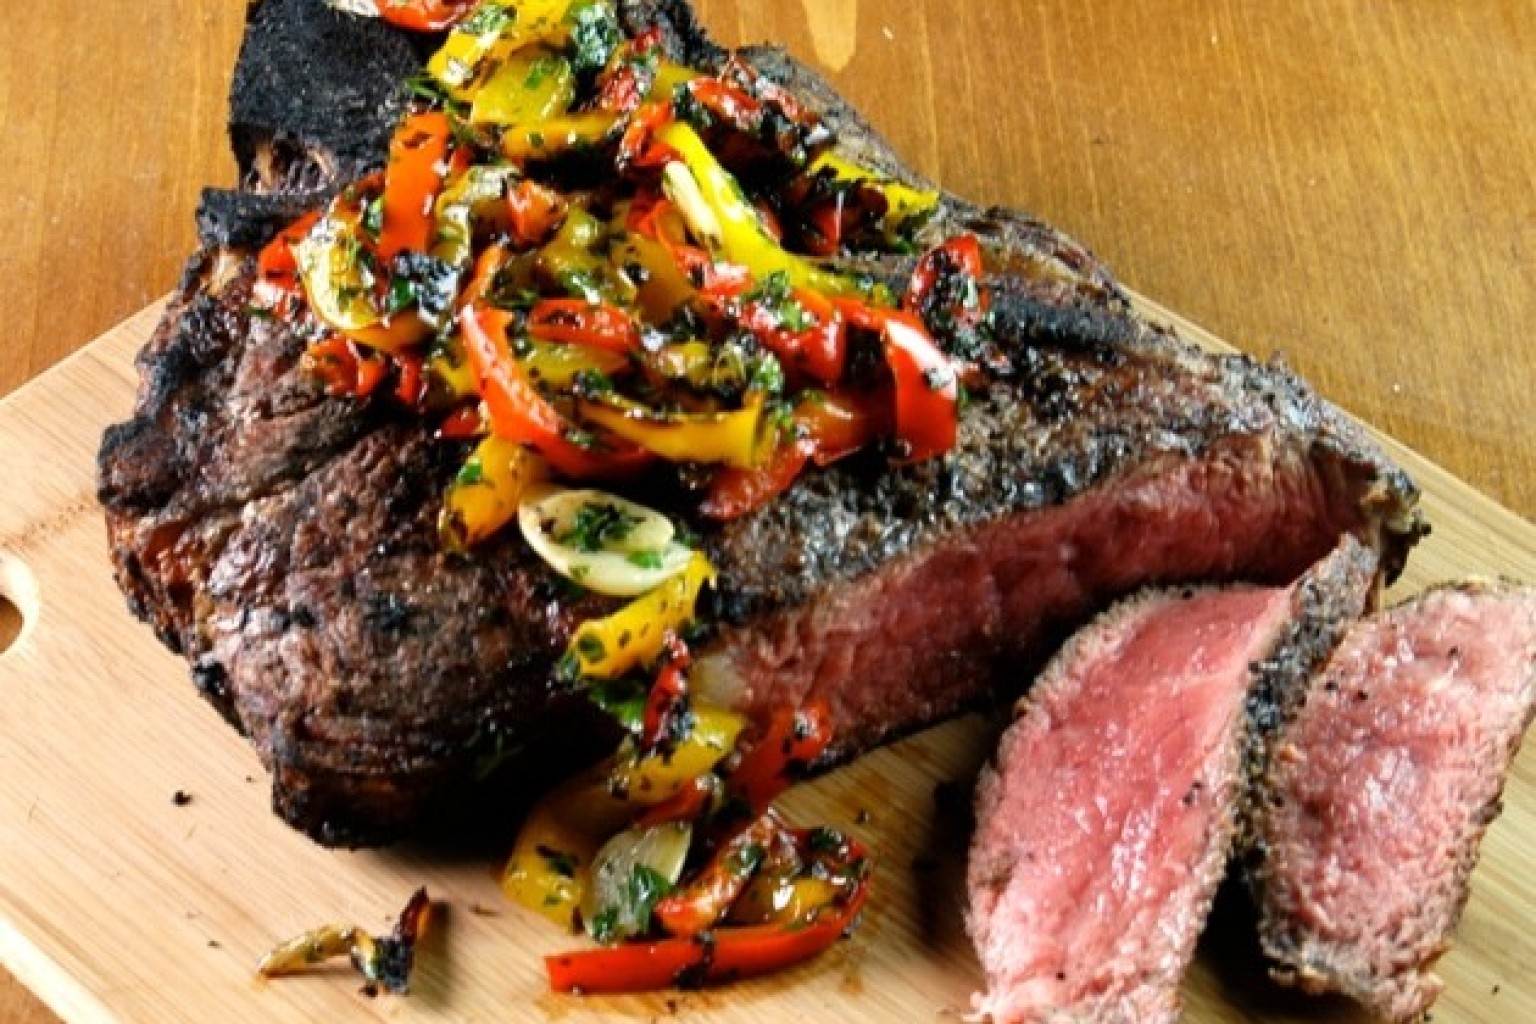 5 Great Steaks to Remember for Killer Grilling! Plus, a Caveman T-Bone